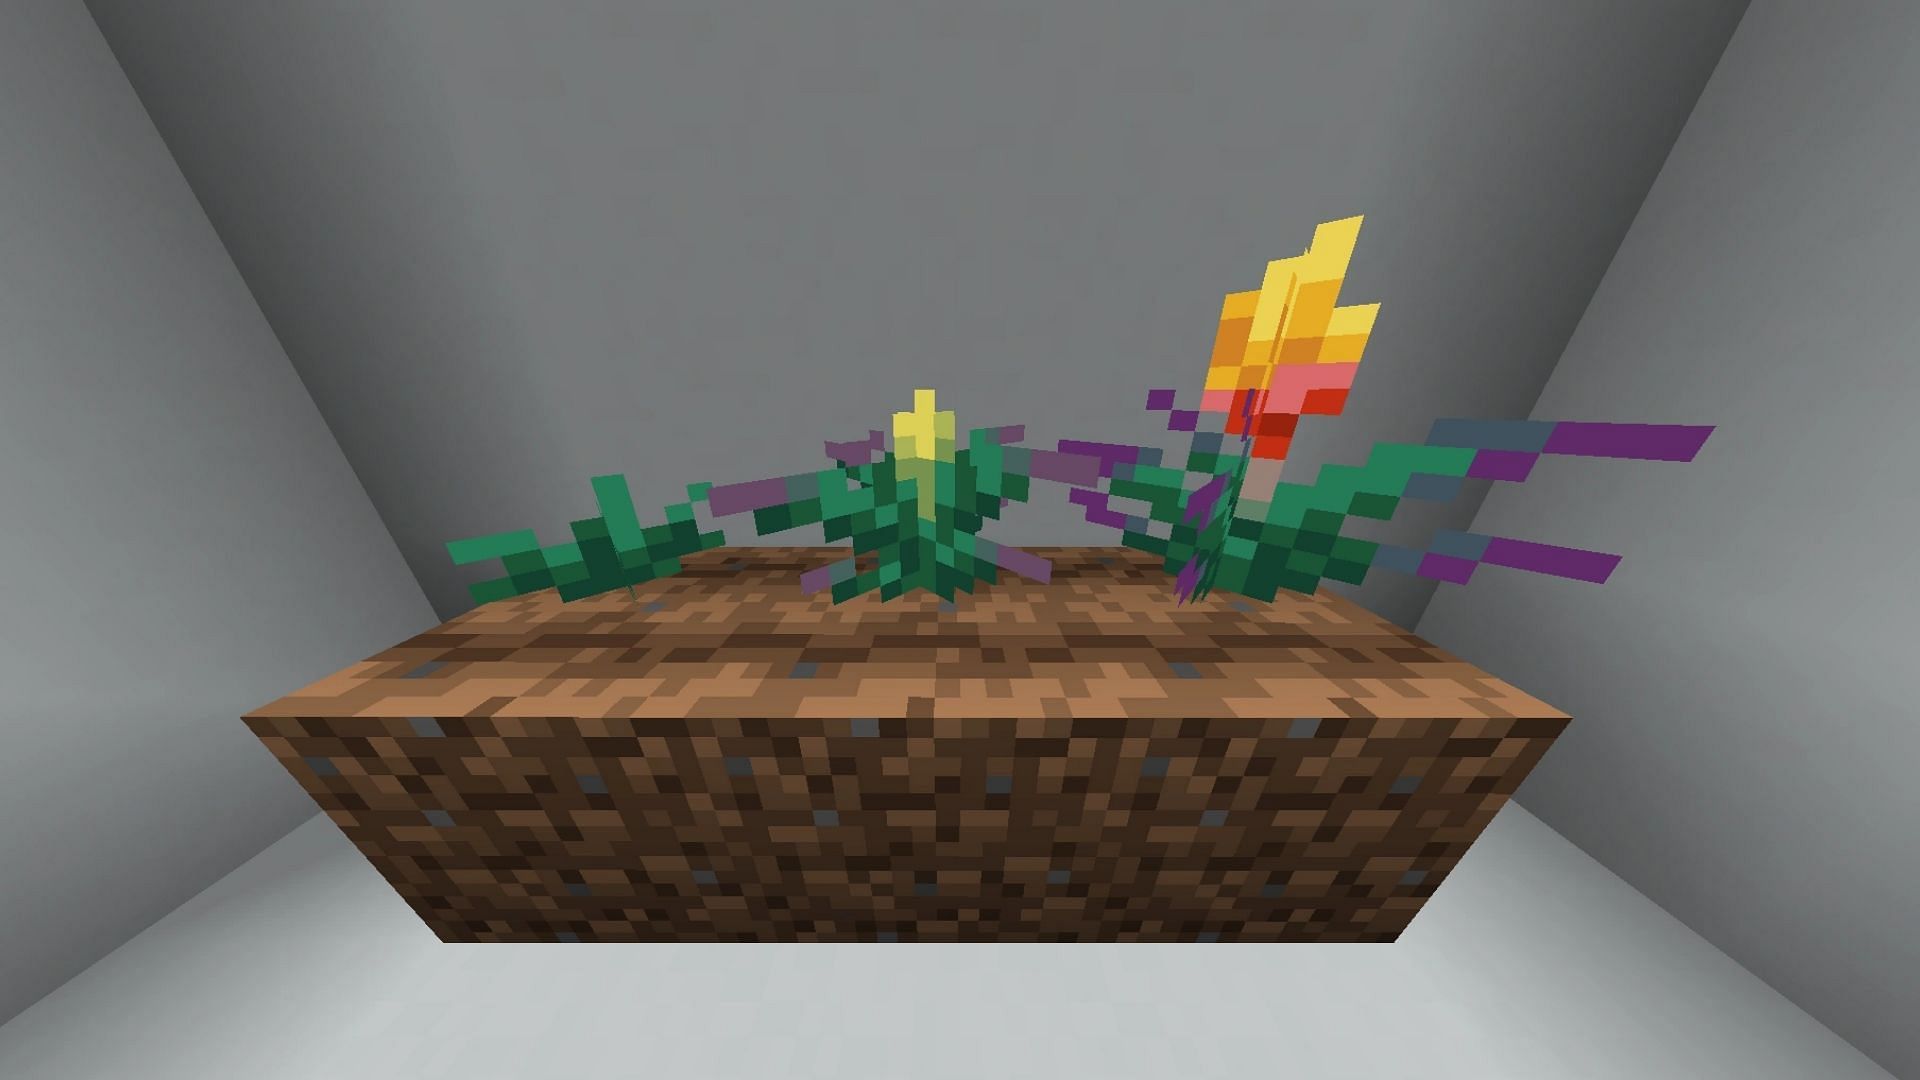 Torchflower seed and plant are new with Sniffer and are confirmed for Minecraft 1.20 update (Image via Mojang)